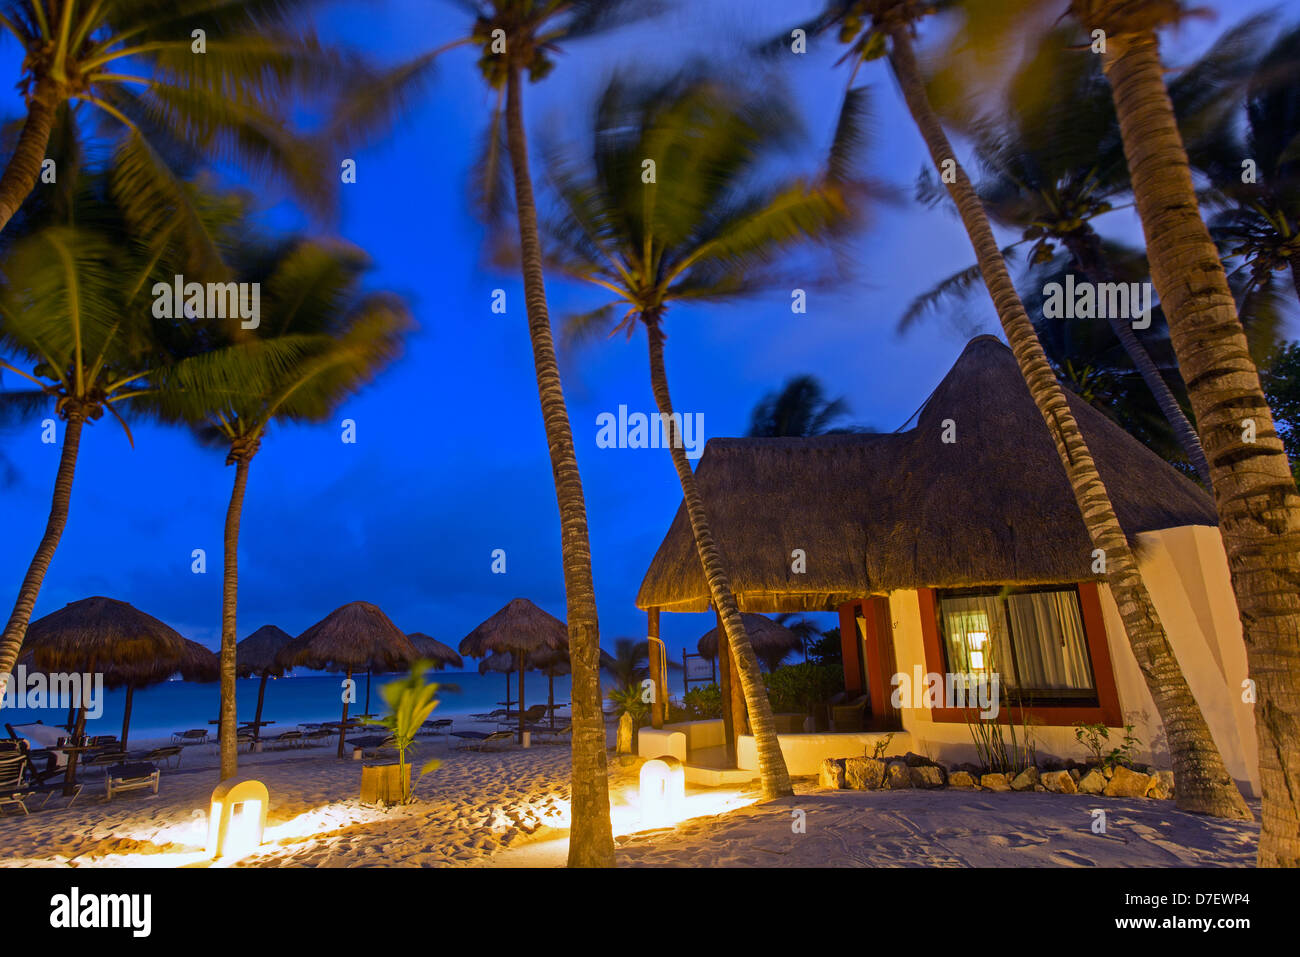 cabana style accommodation on the beach surrounded by palm trees at dawn Stock Photo